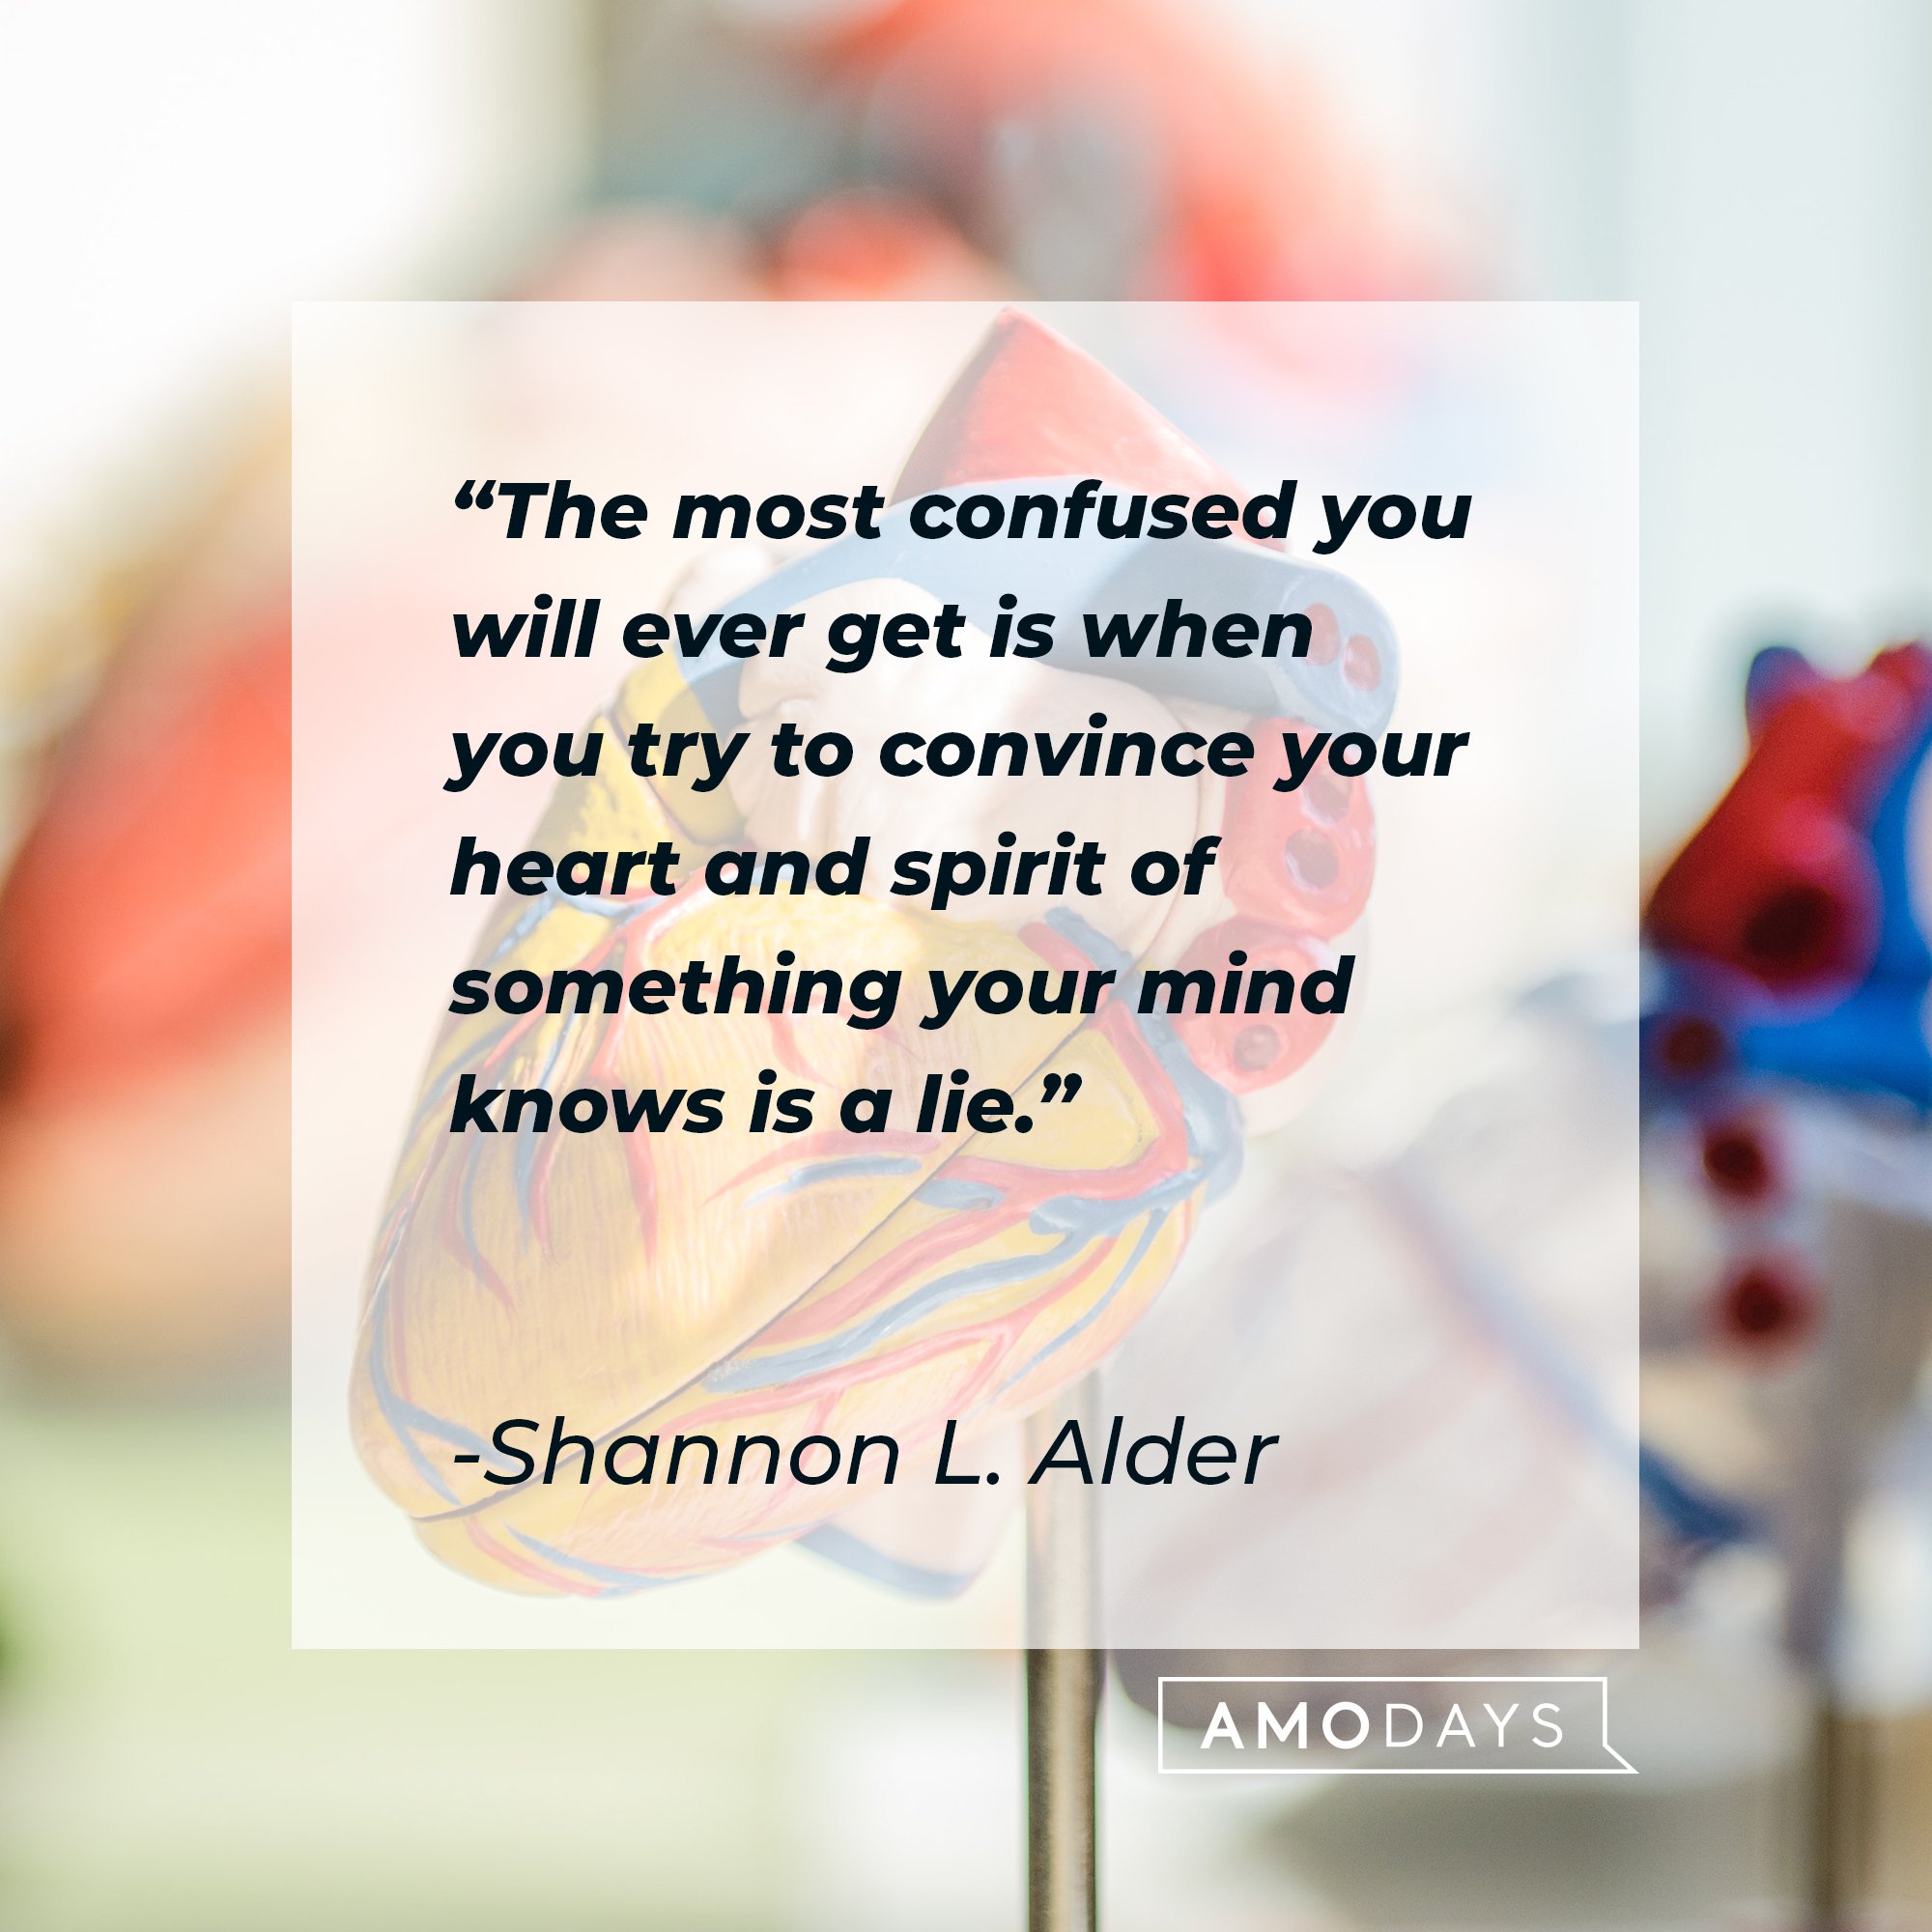 Shannon L. Alder's quote: "The most confused you will ever get is when you try to convince your heart and spirit of something your mind knows is a lie." | Image: AmoDays